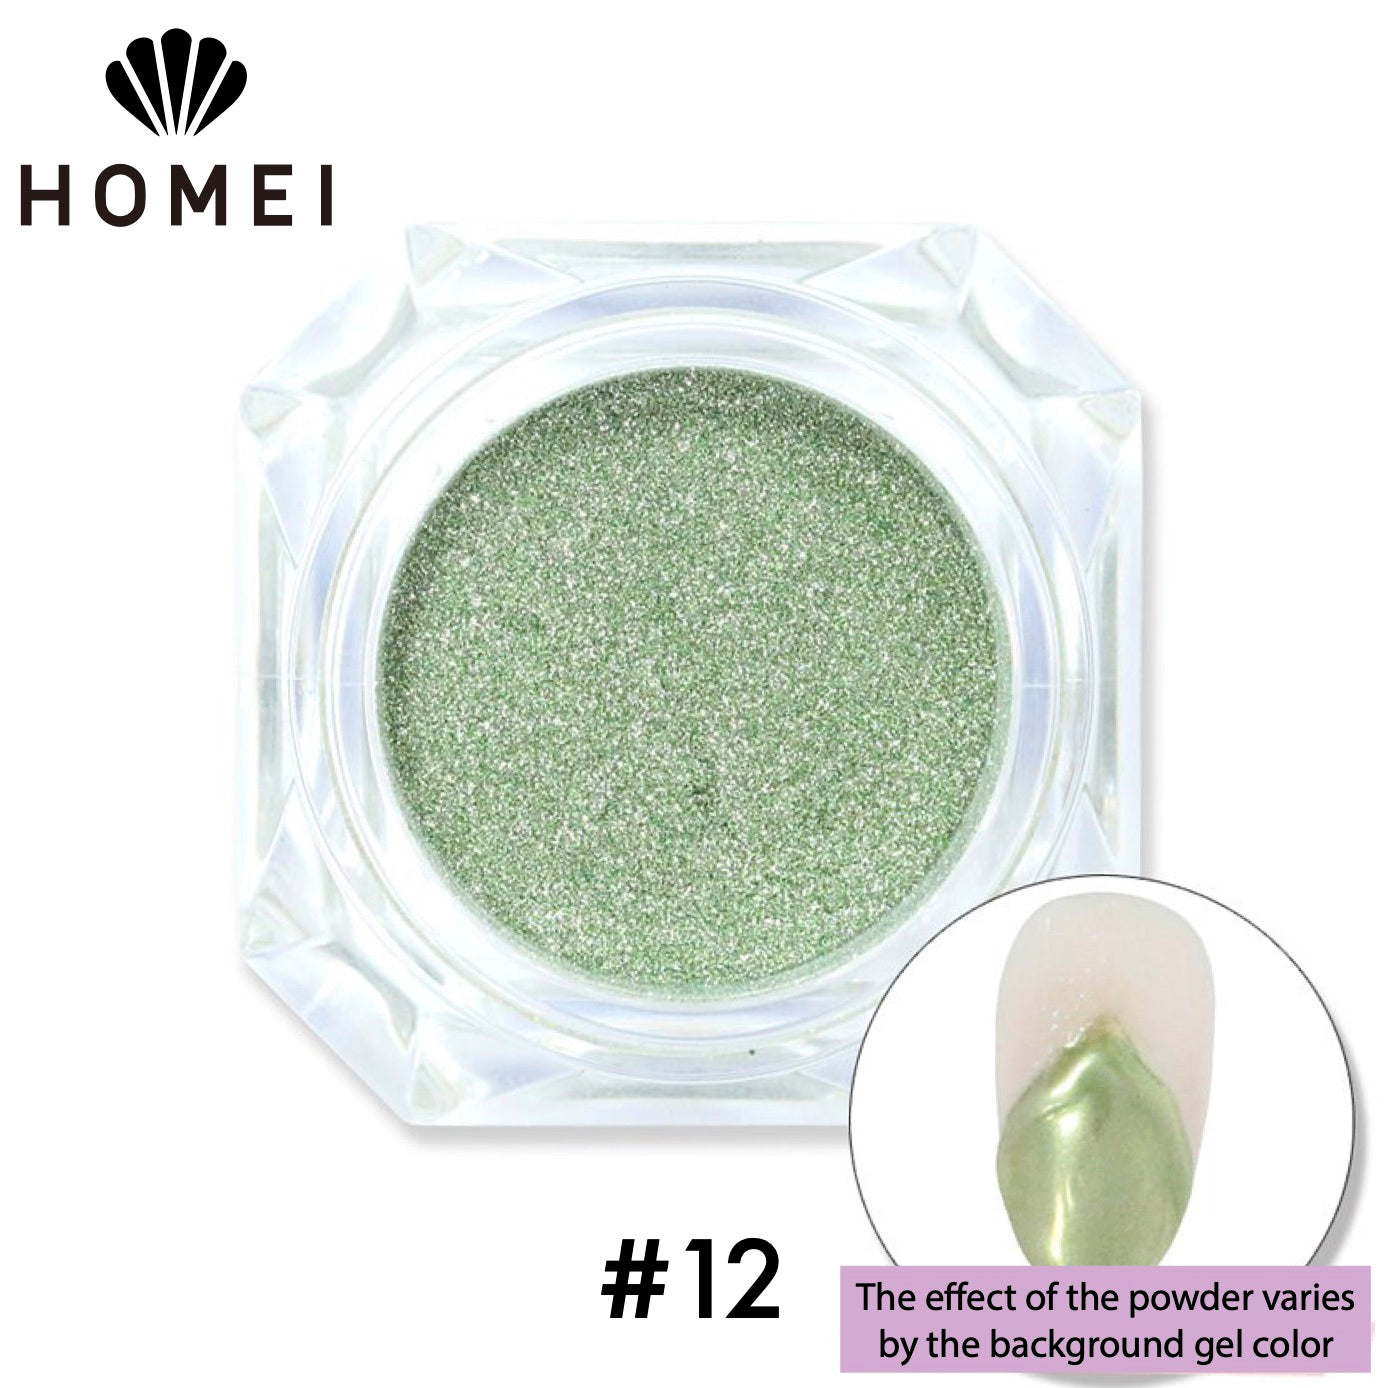 HOMEI Weekly Gel Mirror Powder product image with finished design on nail chip. Metallic light green. 